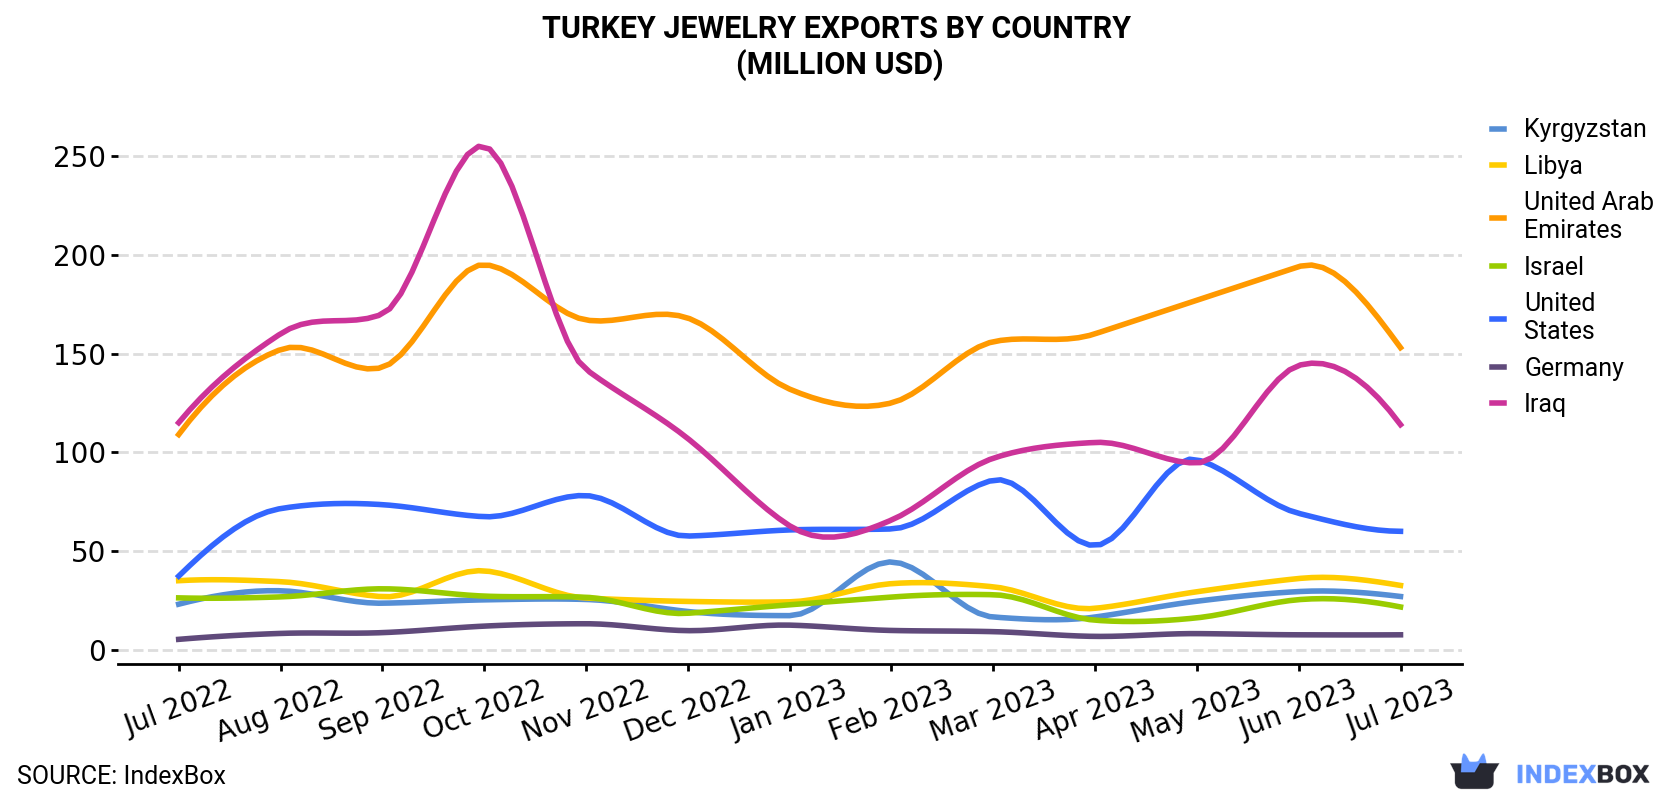 Turkey Jewelry Exports By Country (Million USD)